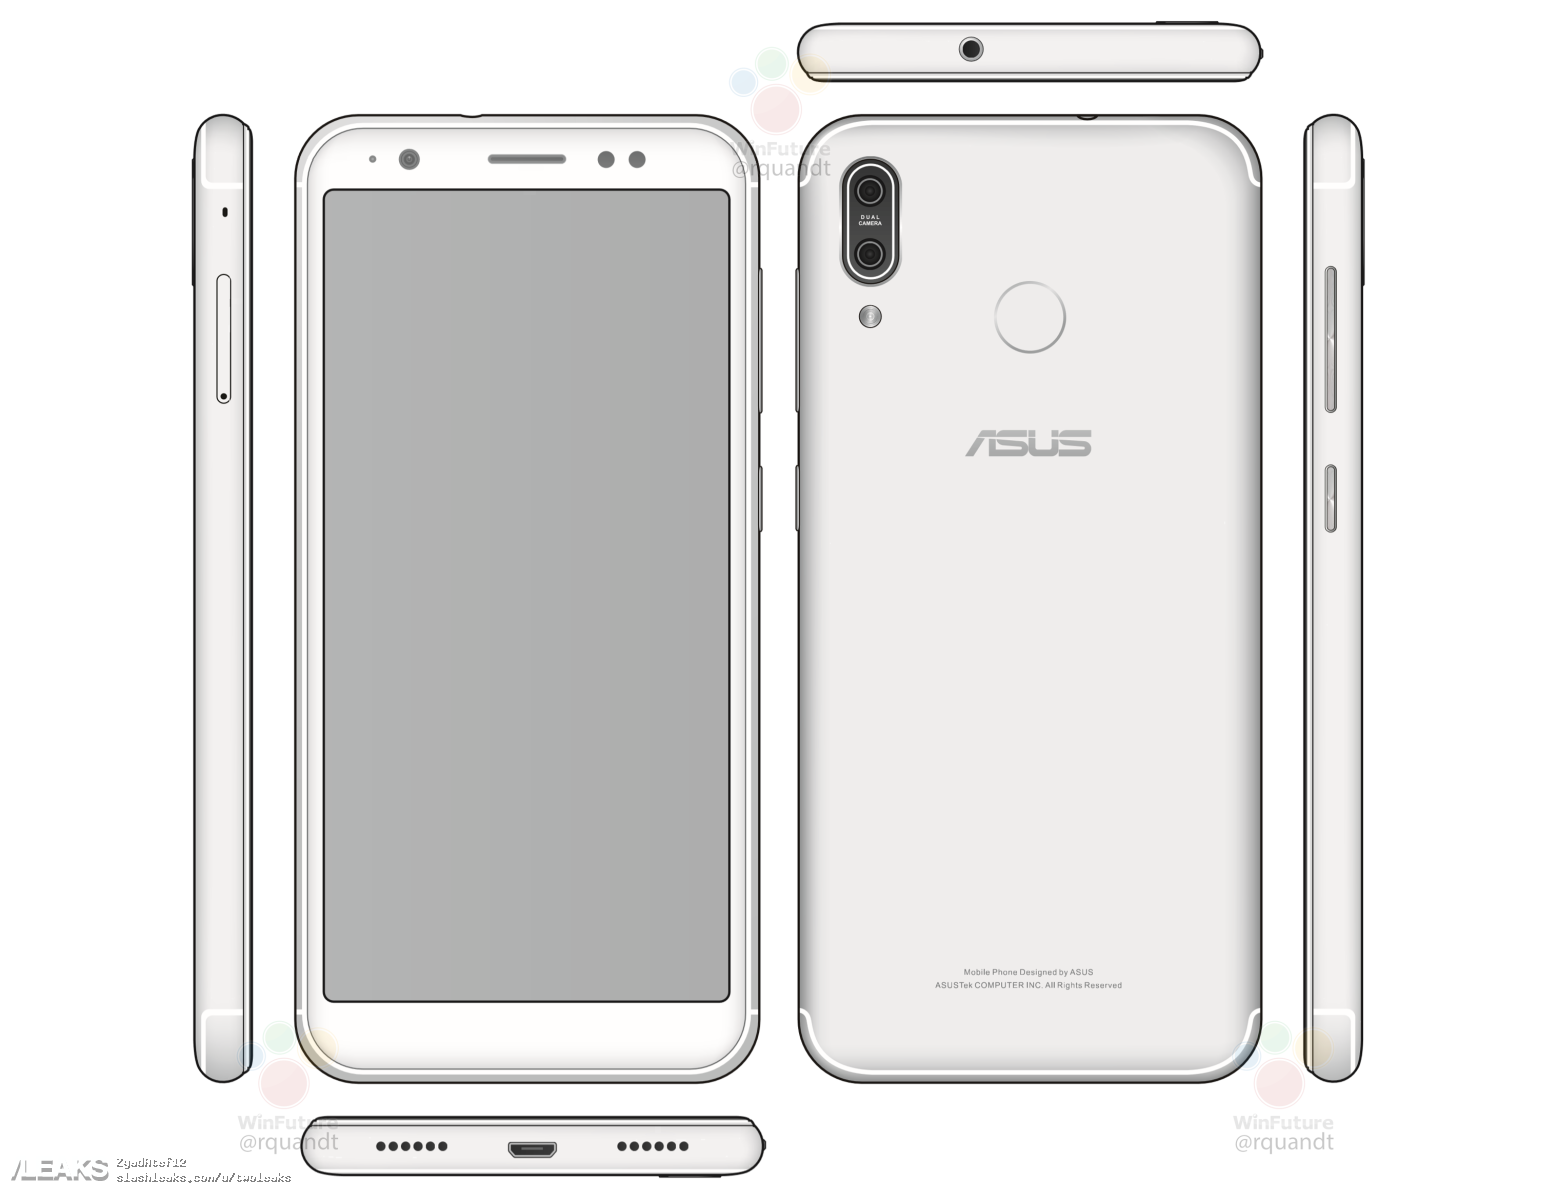 Without waiting for MWC: the network merged images and characteristics of ASUS ZenFone 5